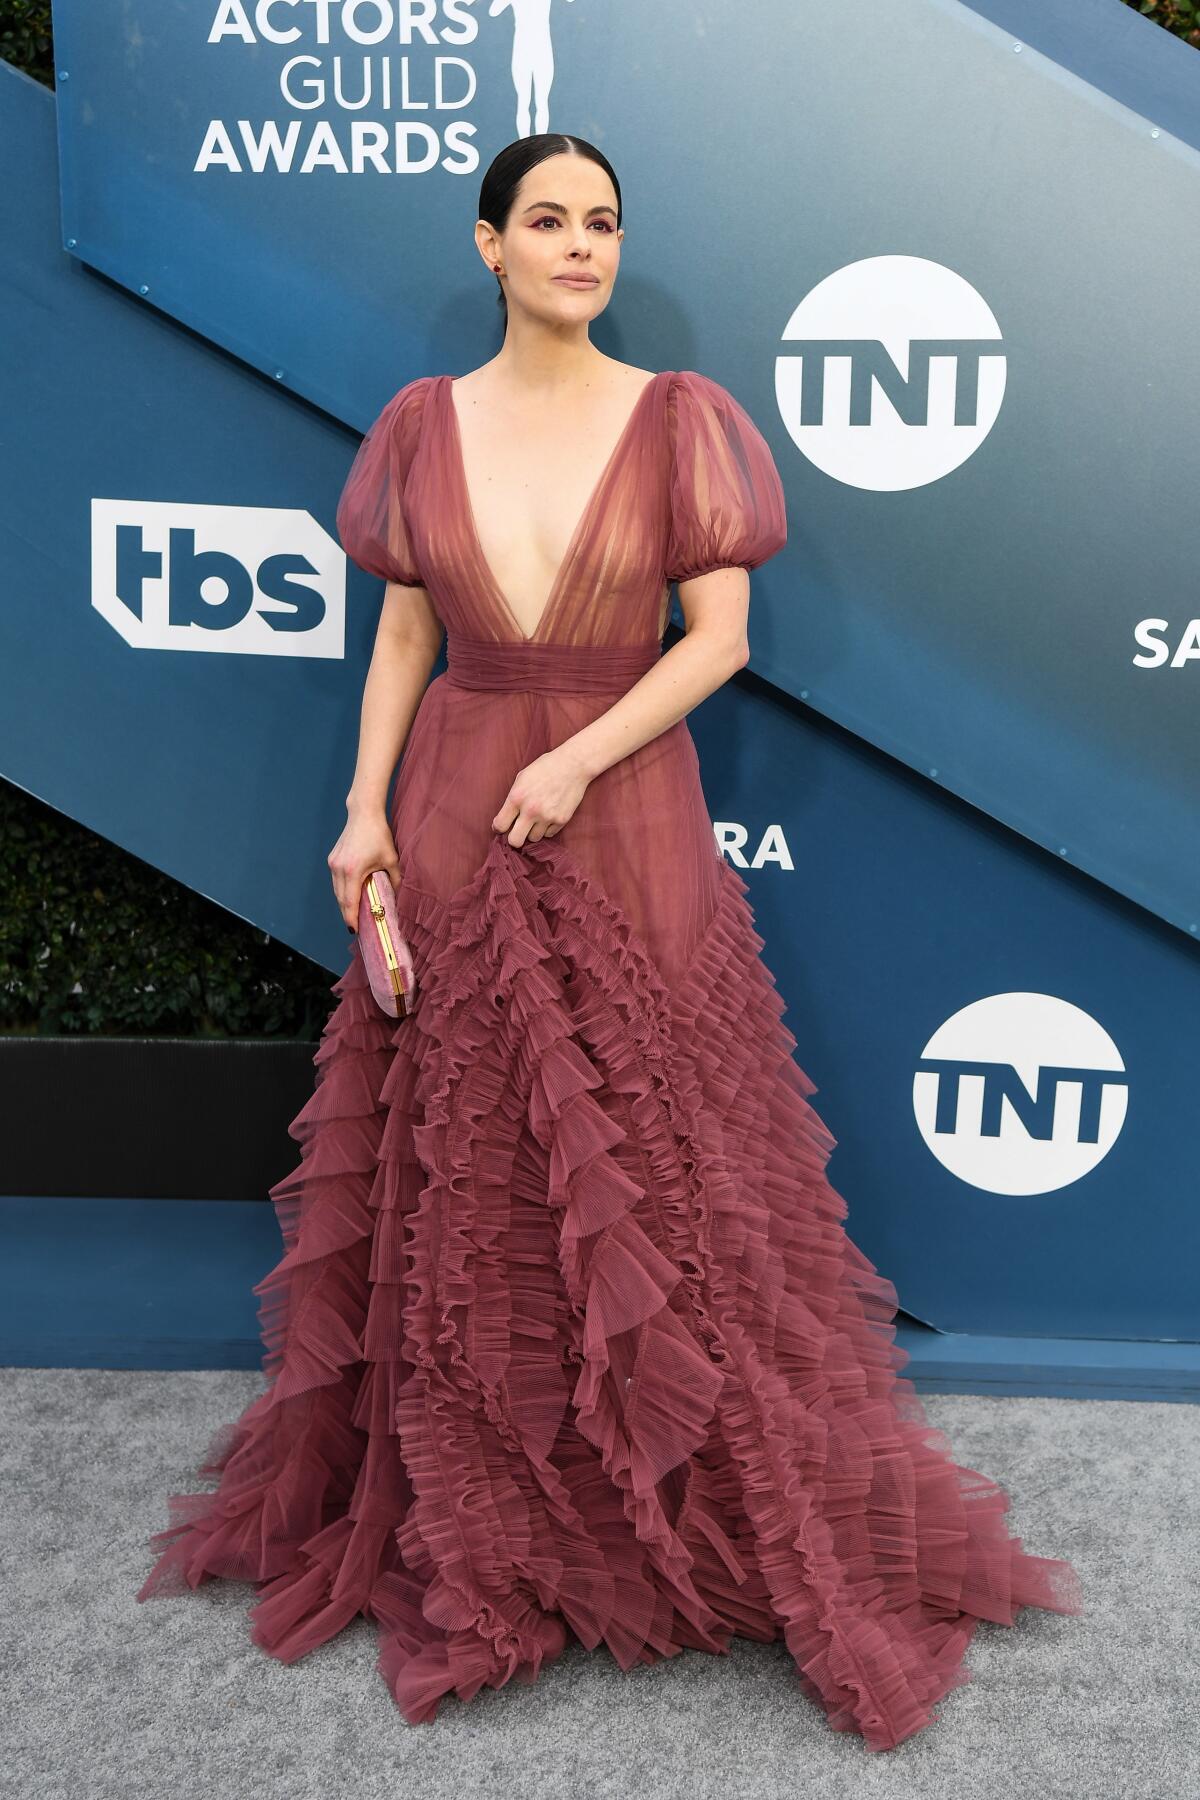 Emily Hampshire arrives at the SAG Awards in a long ruffled gown with a deep V neck in front of a backdrop